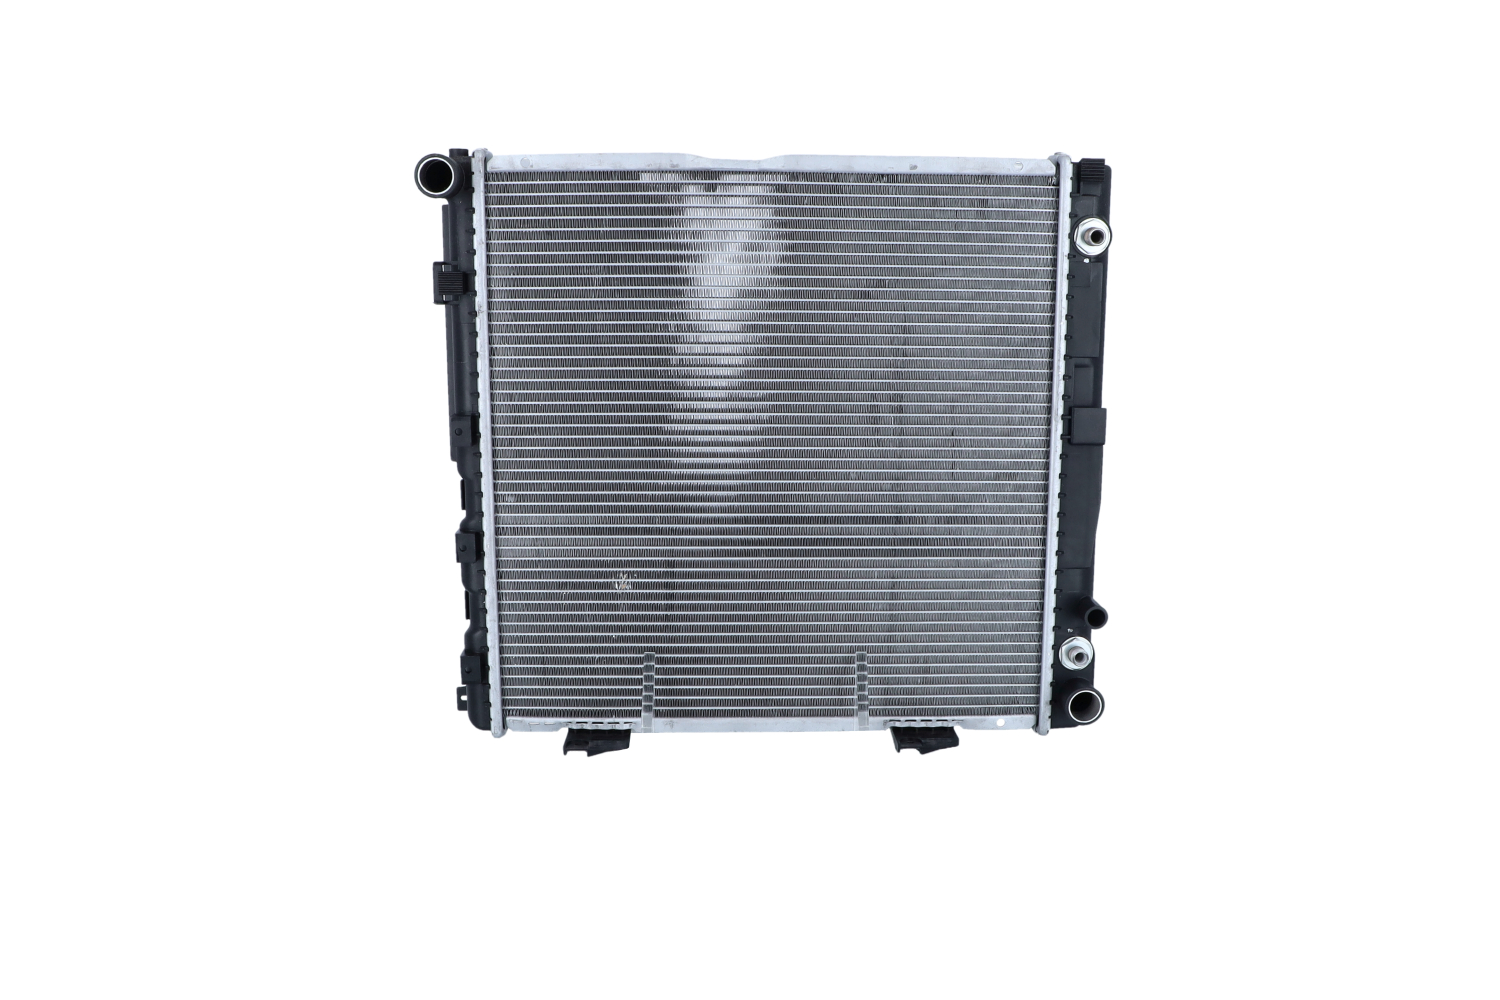 NRF 53872 Engine radiator Aluminium, 492 x 485 x 42 mm, with mounting parts, Brazed cooling fins